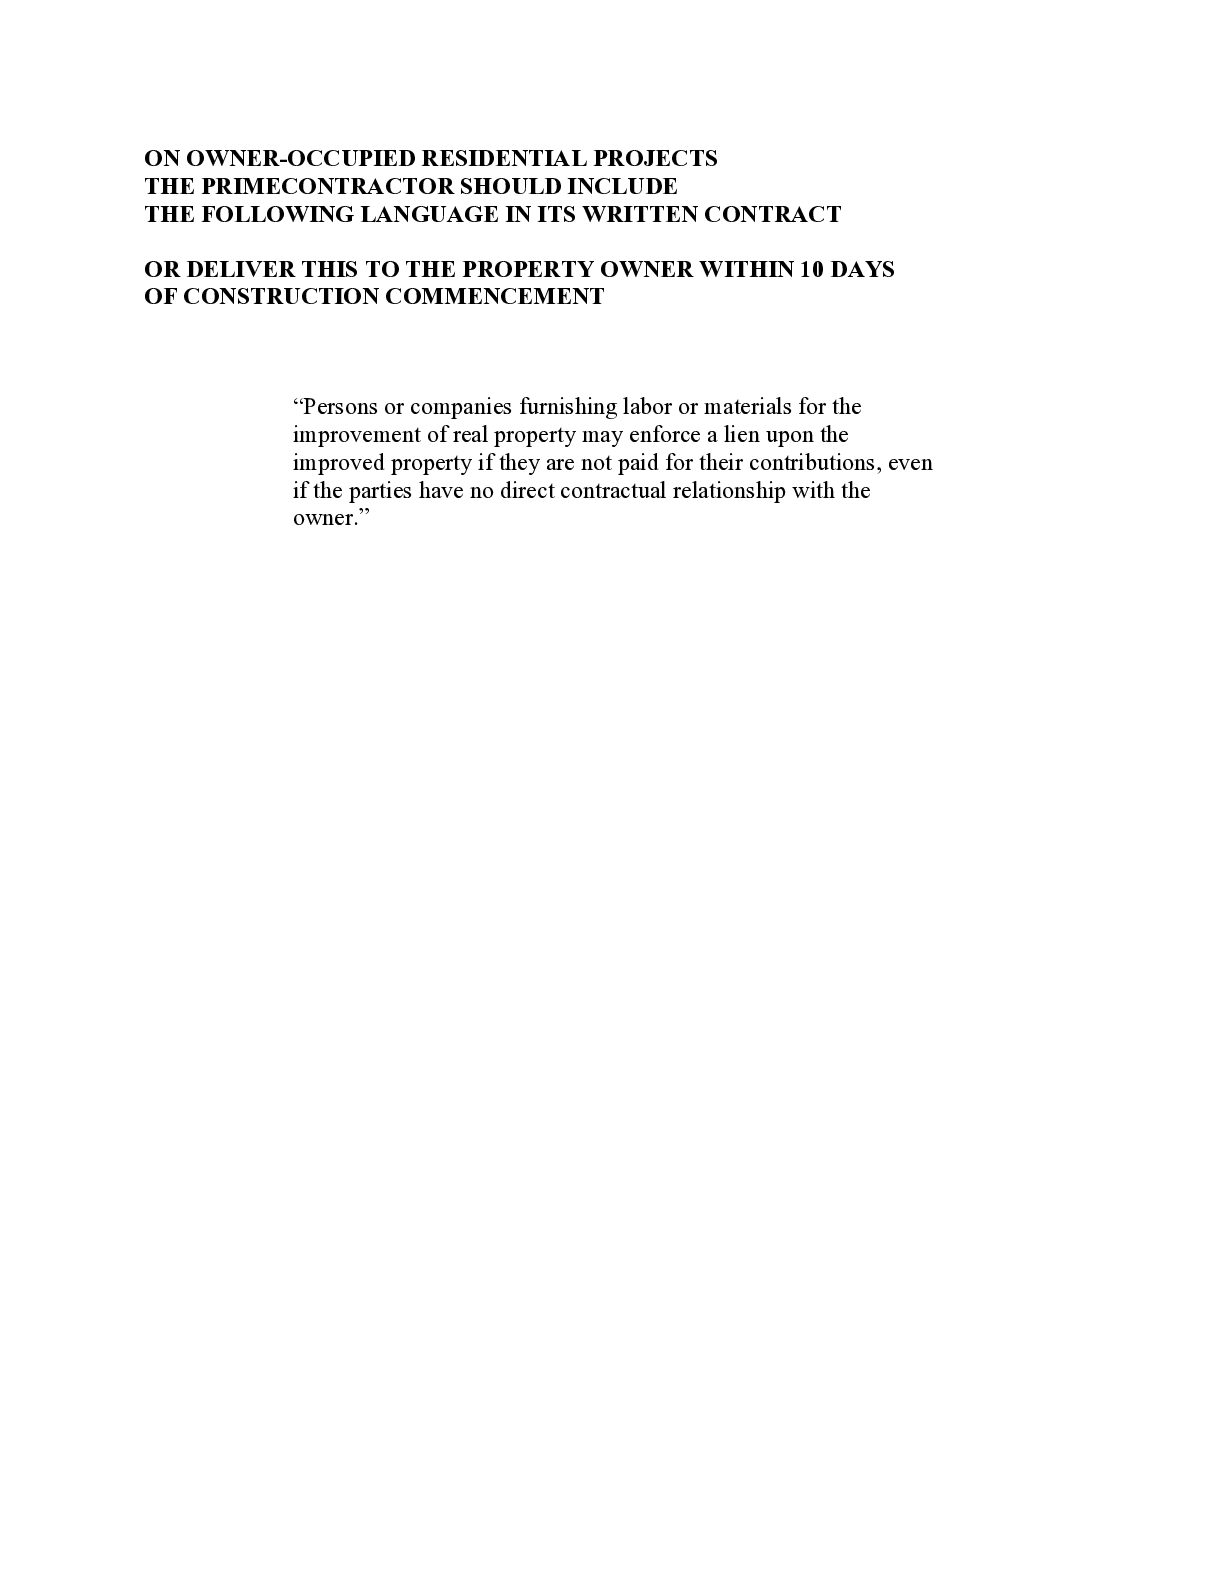 Iowa Prime Contractor Notice to Owner Form